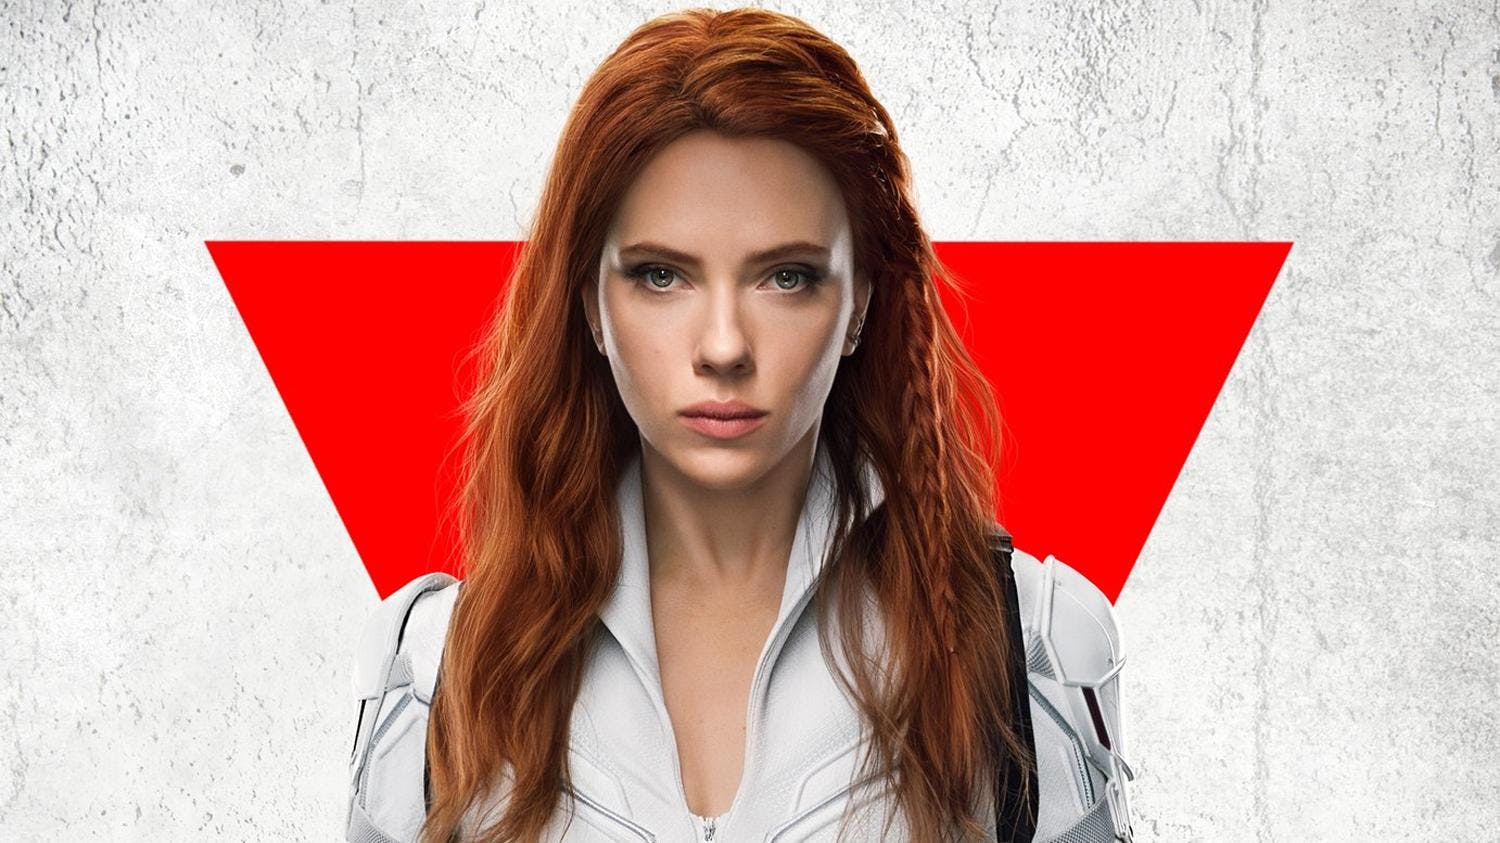 Marvel's Black Widow Creates a Pandemic Opening Record At $89M+ Box Office Collection